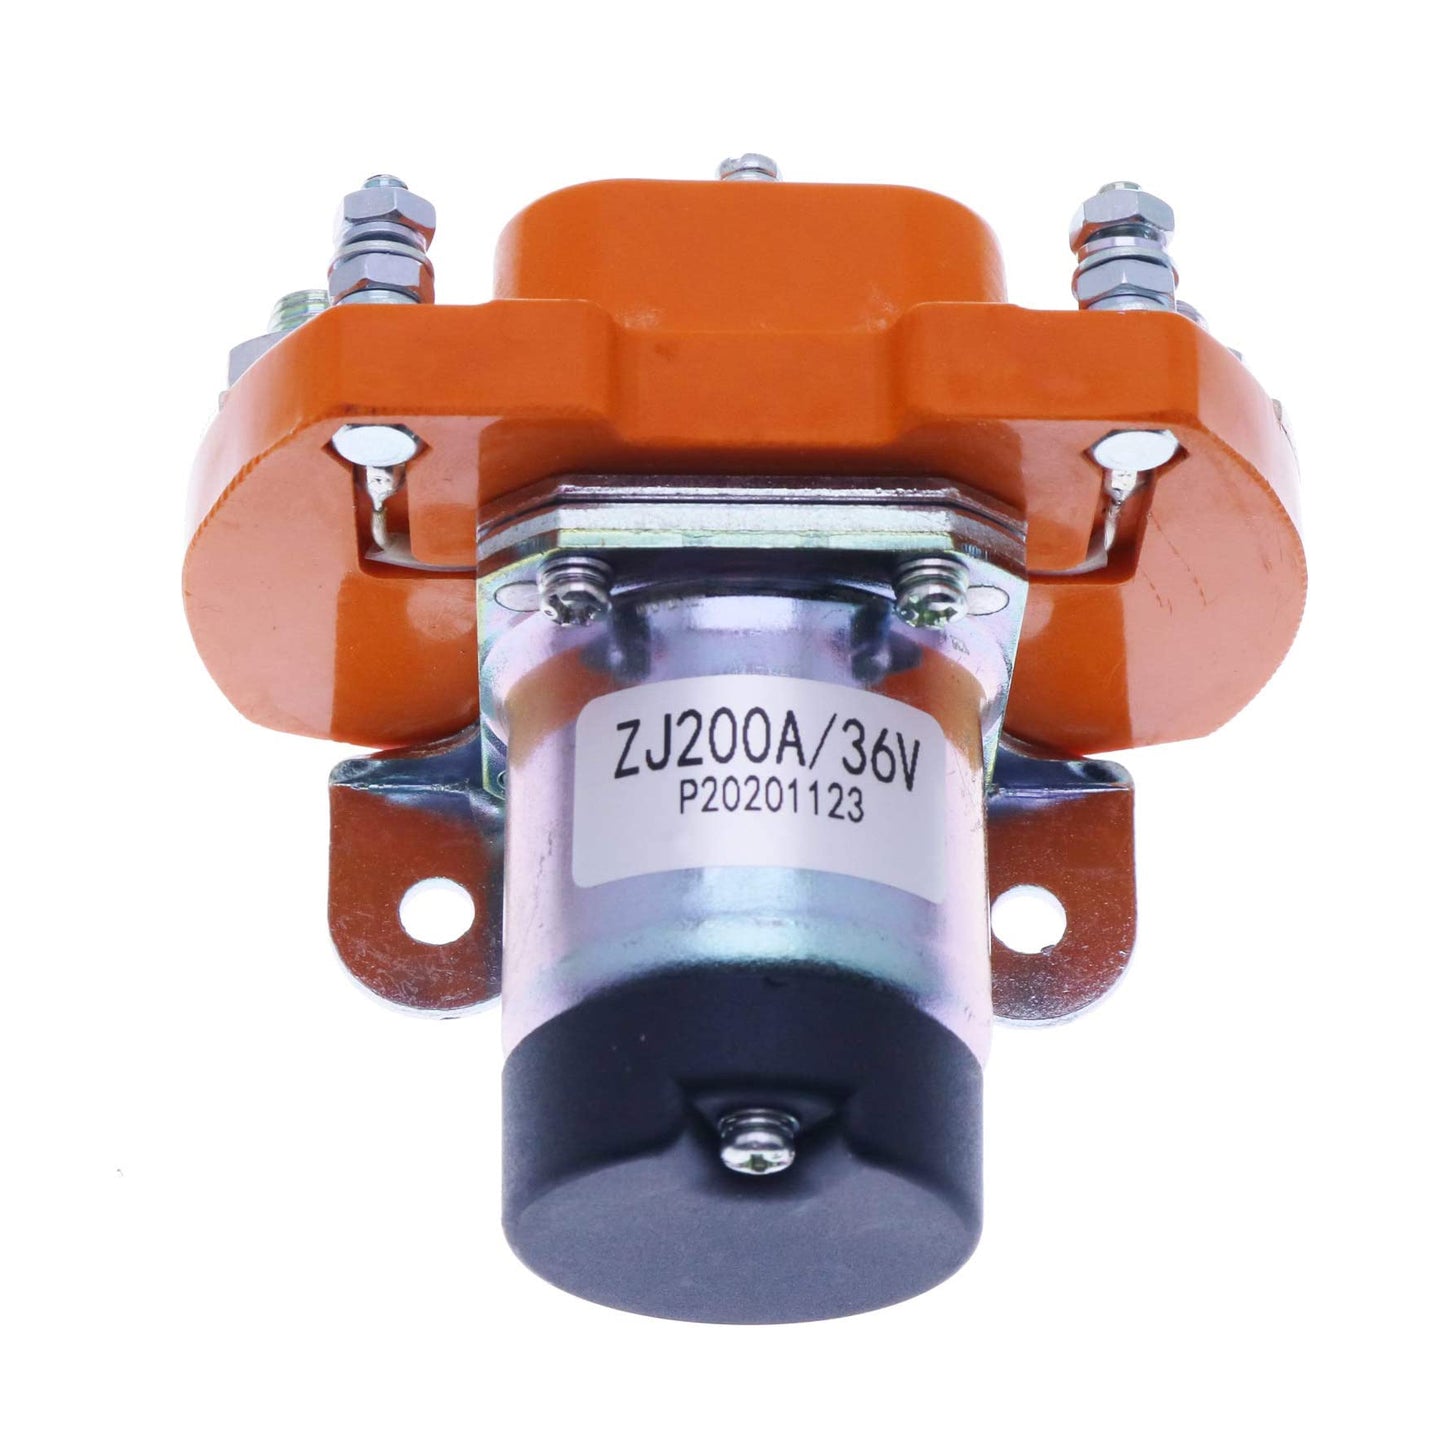 New Universal Contactor Solenoid MZJ-200A 200A 36V Compatible with Heavy Duty Golf Cart Upgrade Electric Vehicle Forklift Battery Car Tractor Winch Motor (N/O)